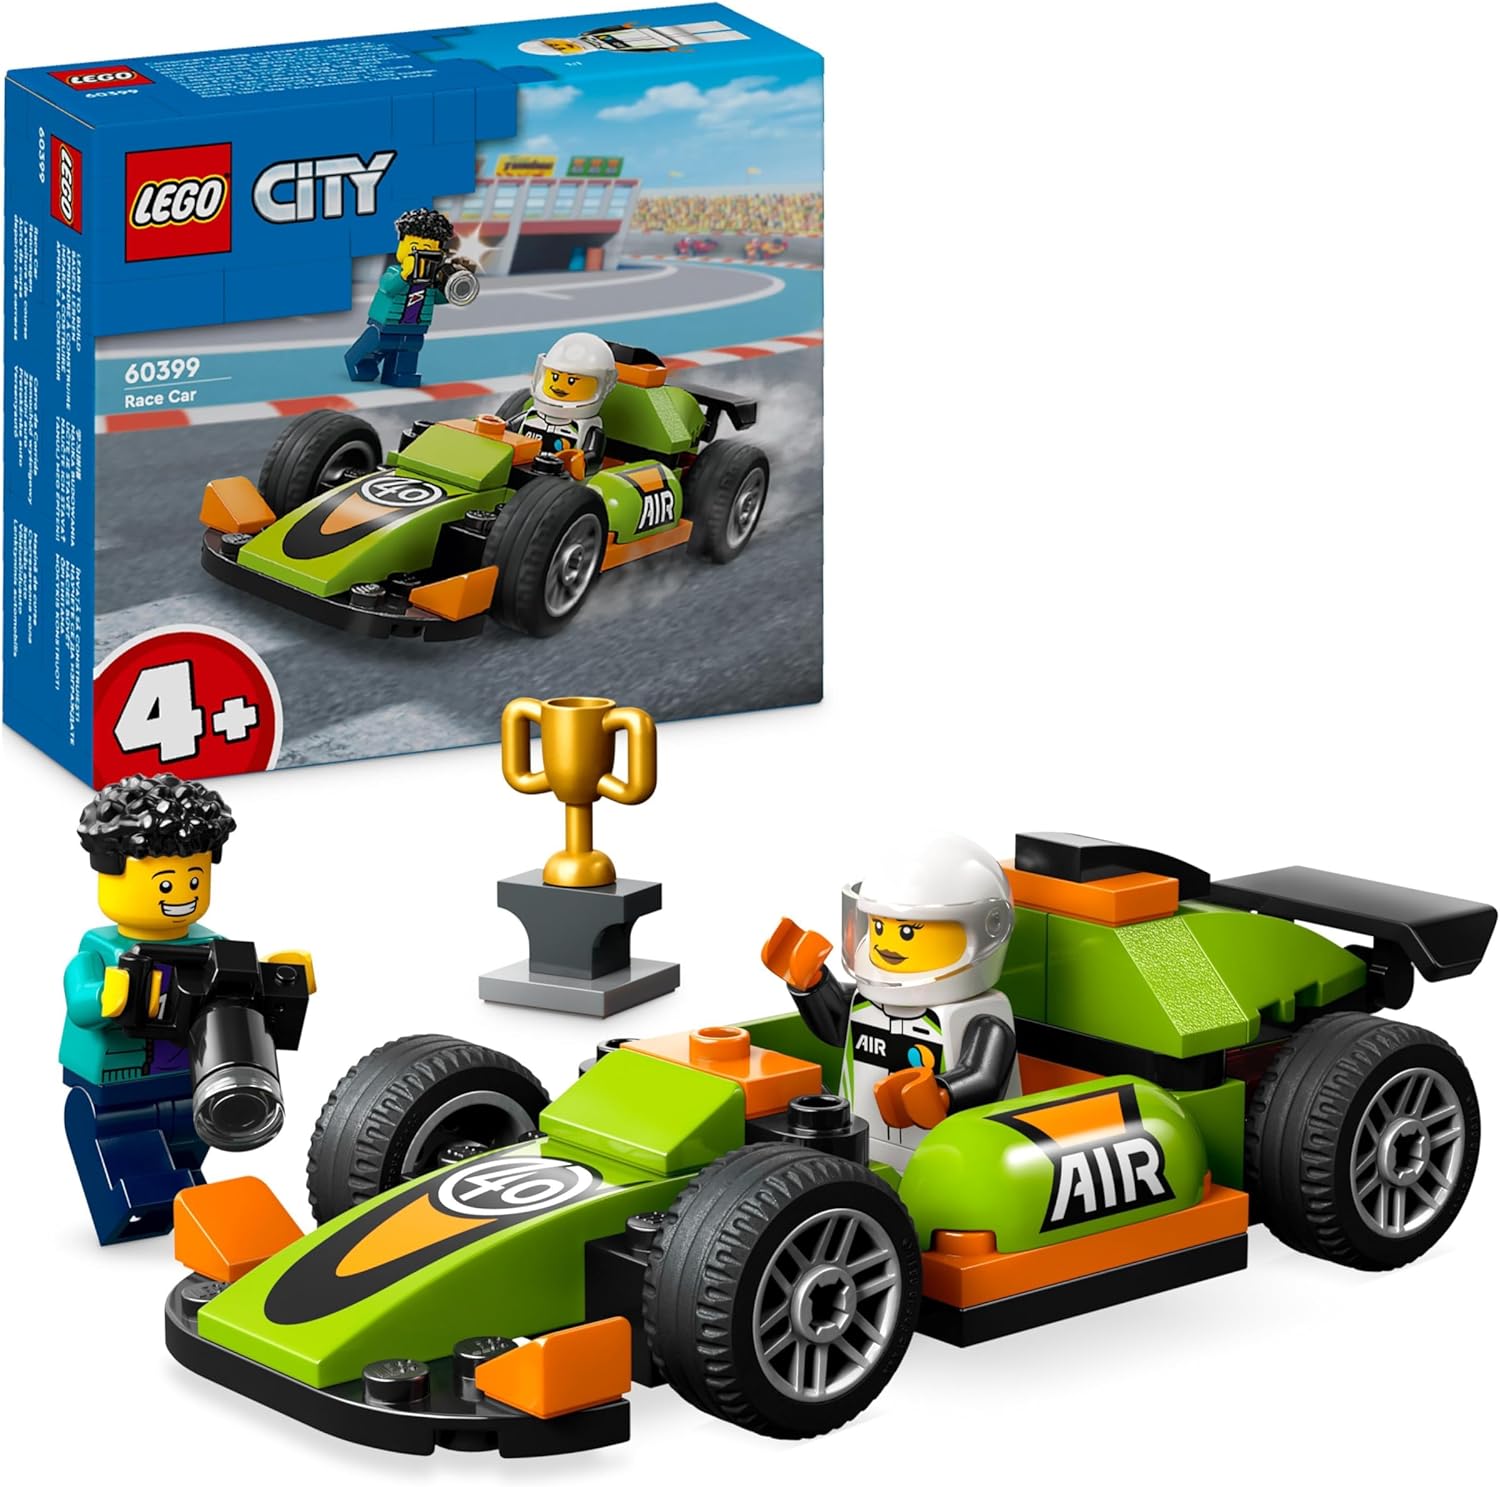 Honest Forwarder  LEGO City Racing Car, Toy Racing Car, Classic Sports Car,  Gift for Children, Car Construction Set for Boys and Girls from 4 Years  with 2 Mini Figures, Including A